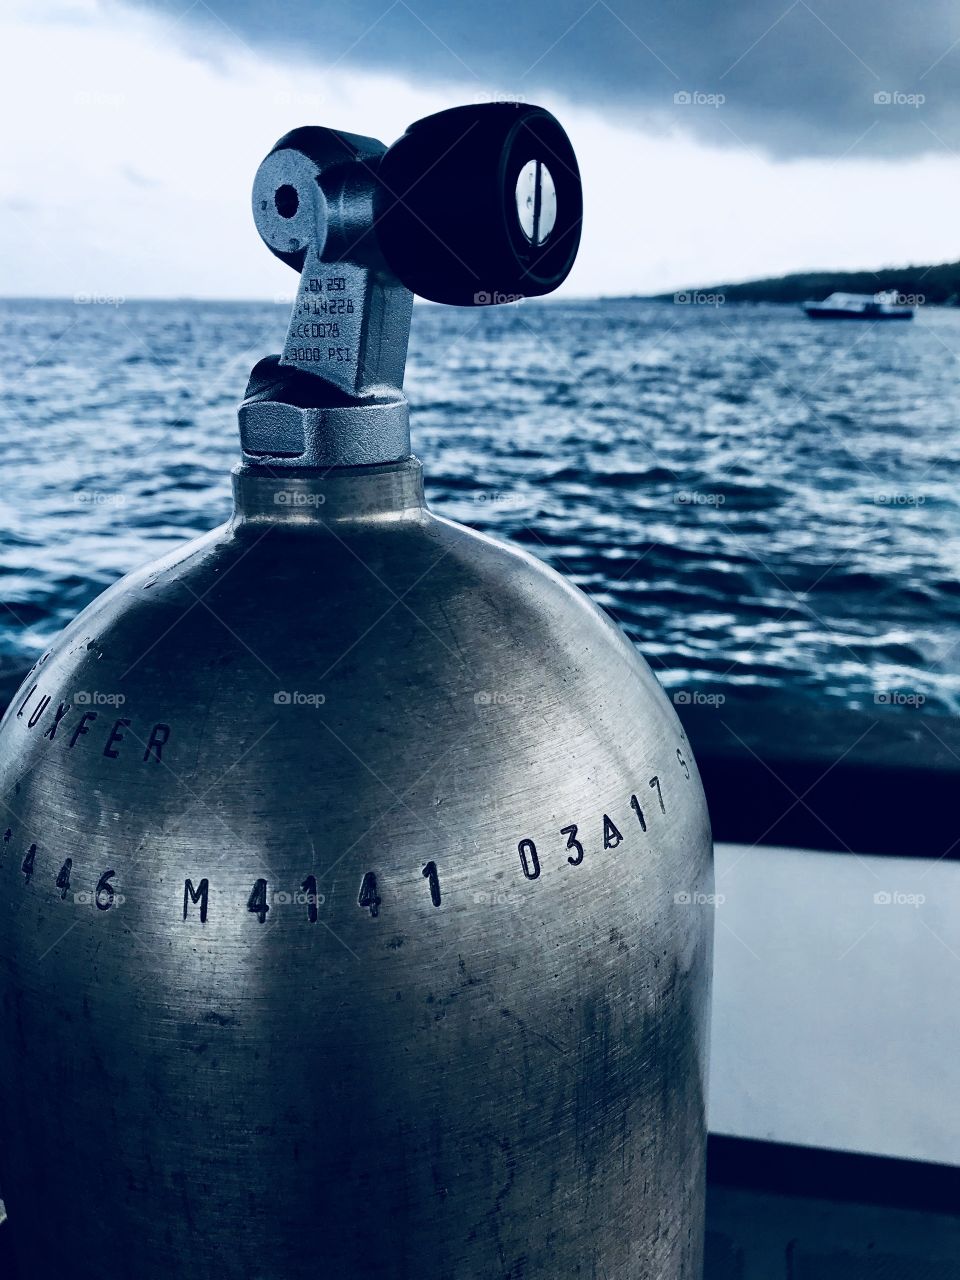 A gas Bottle for diving in a boat at the sea